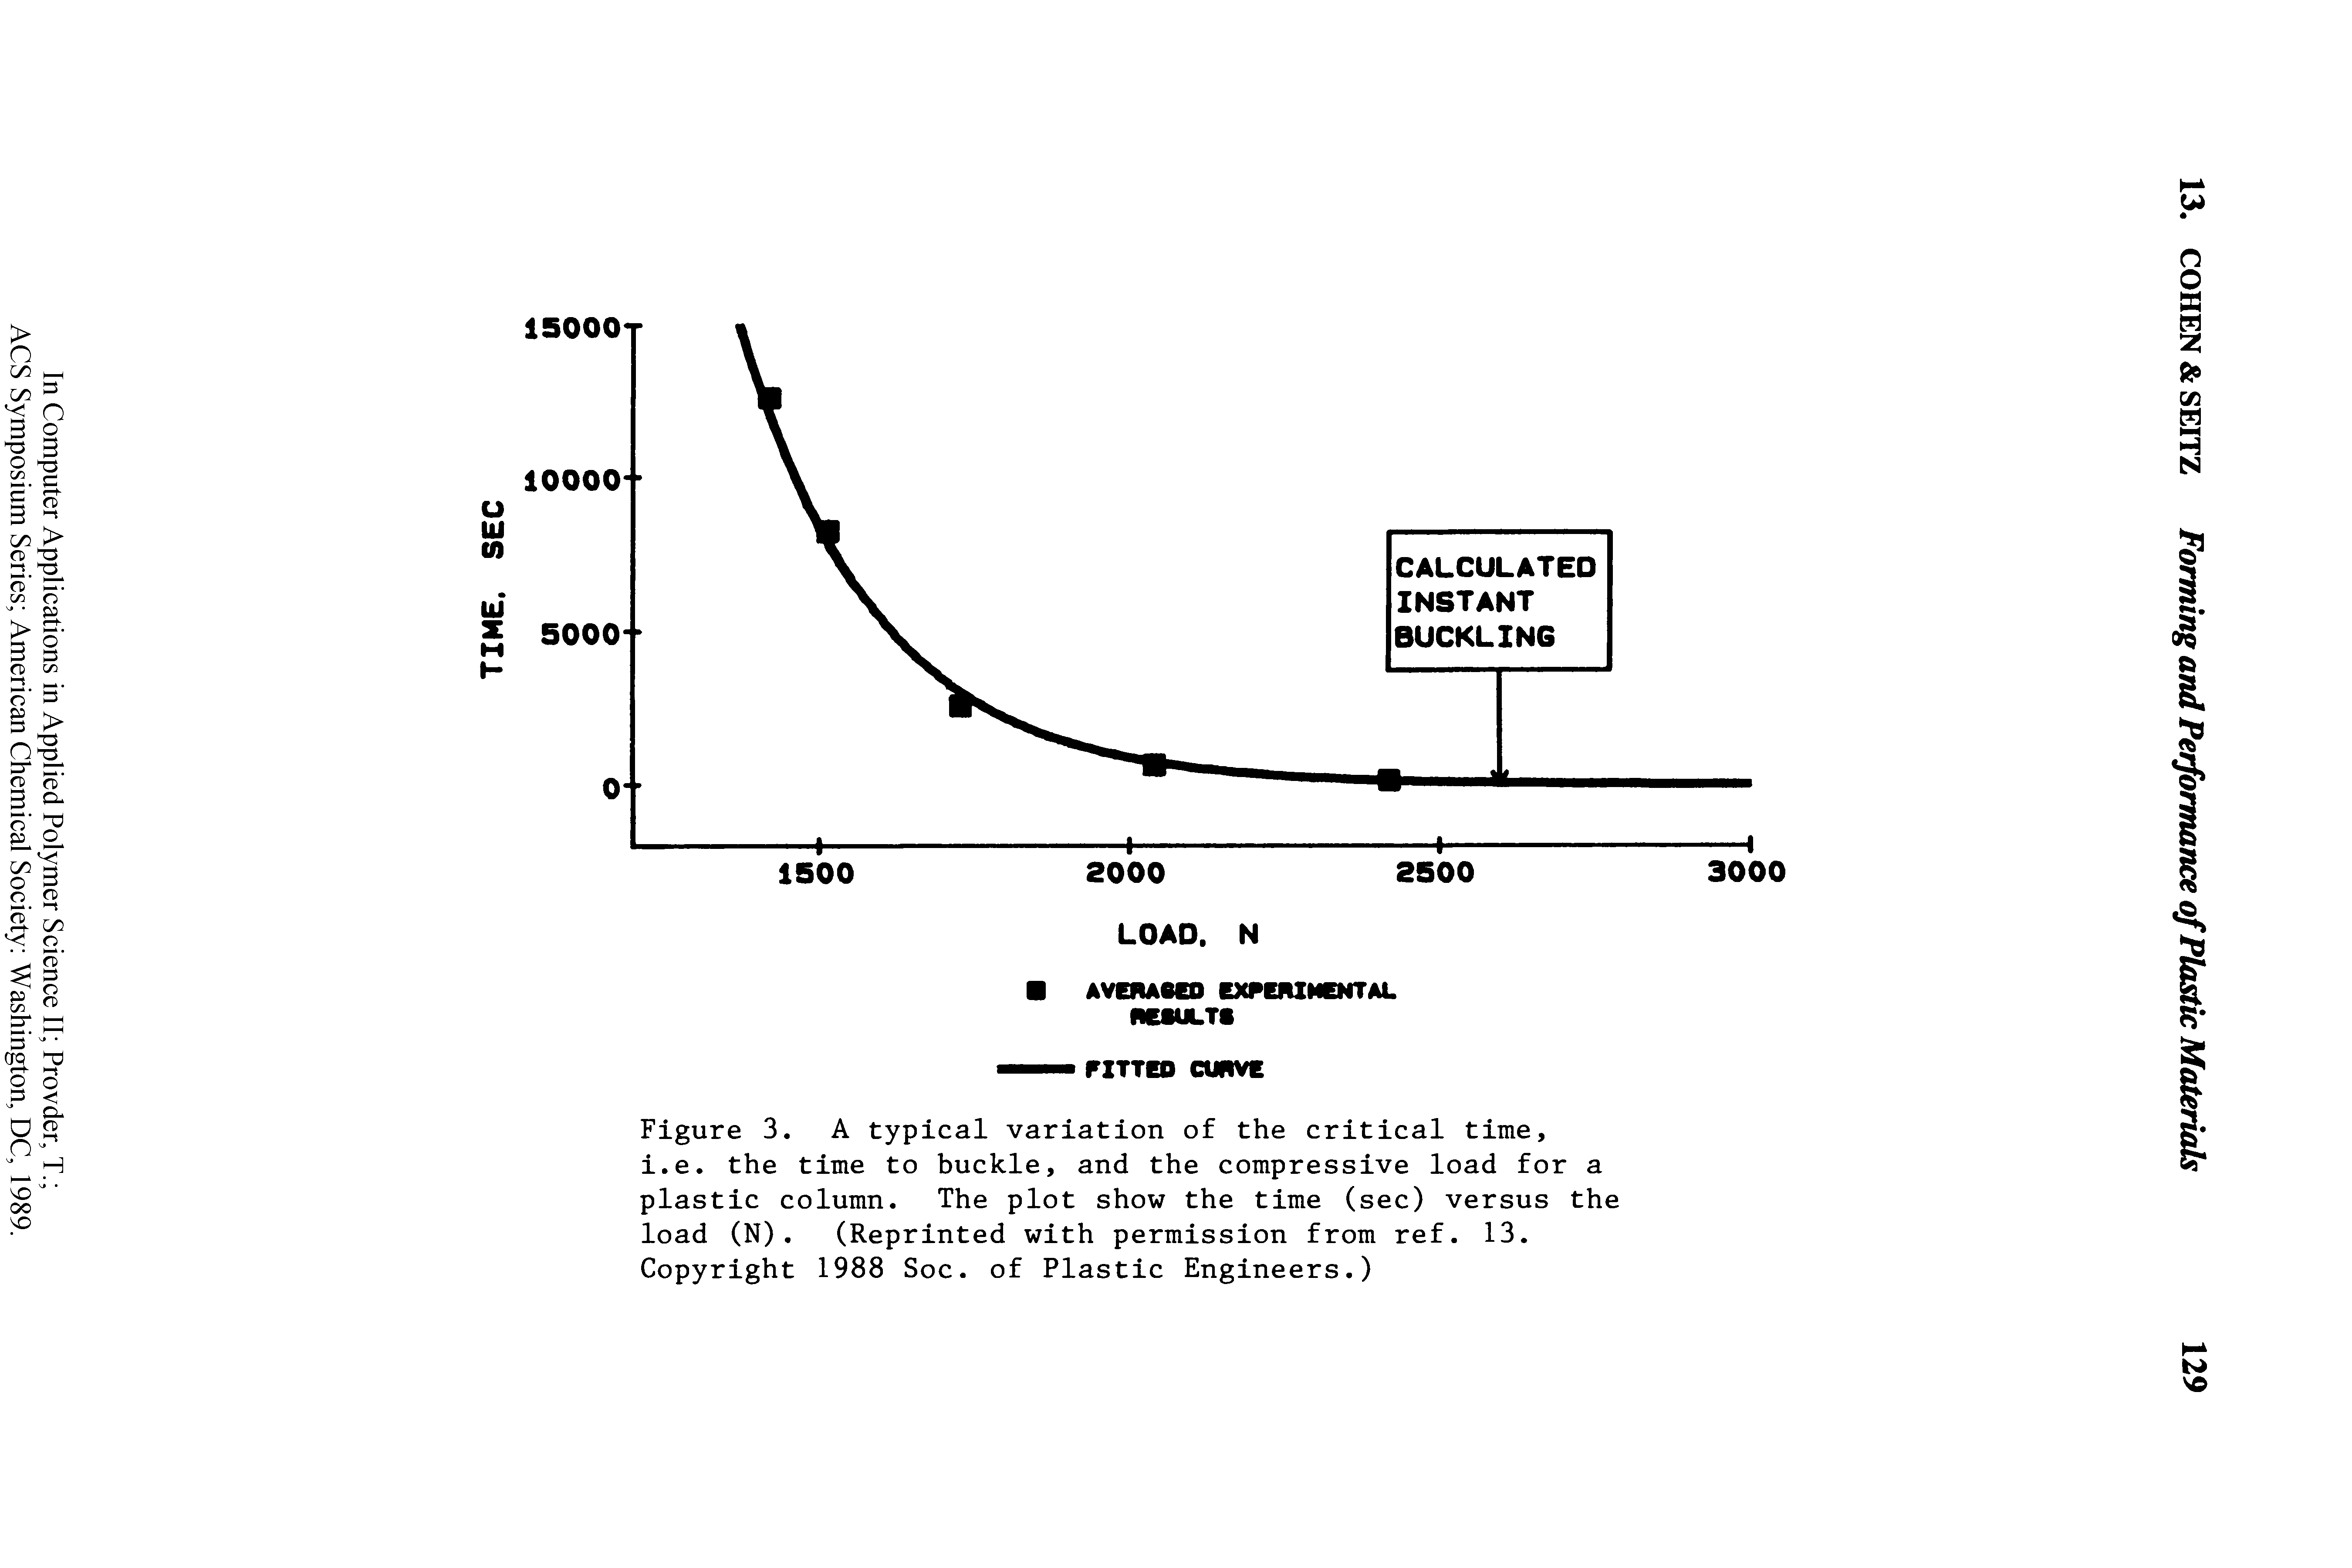 Figure 3. A typical variation of the critical time, i.e. the time to buckle, and the compressive load for a plastic column. The plot show the time (sec) versus the load (N). (Reprinted with permission from ref. 13. Copyright 1988 Soc. of Plastic Engineers.)...